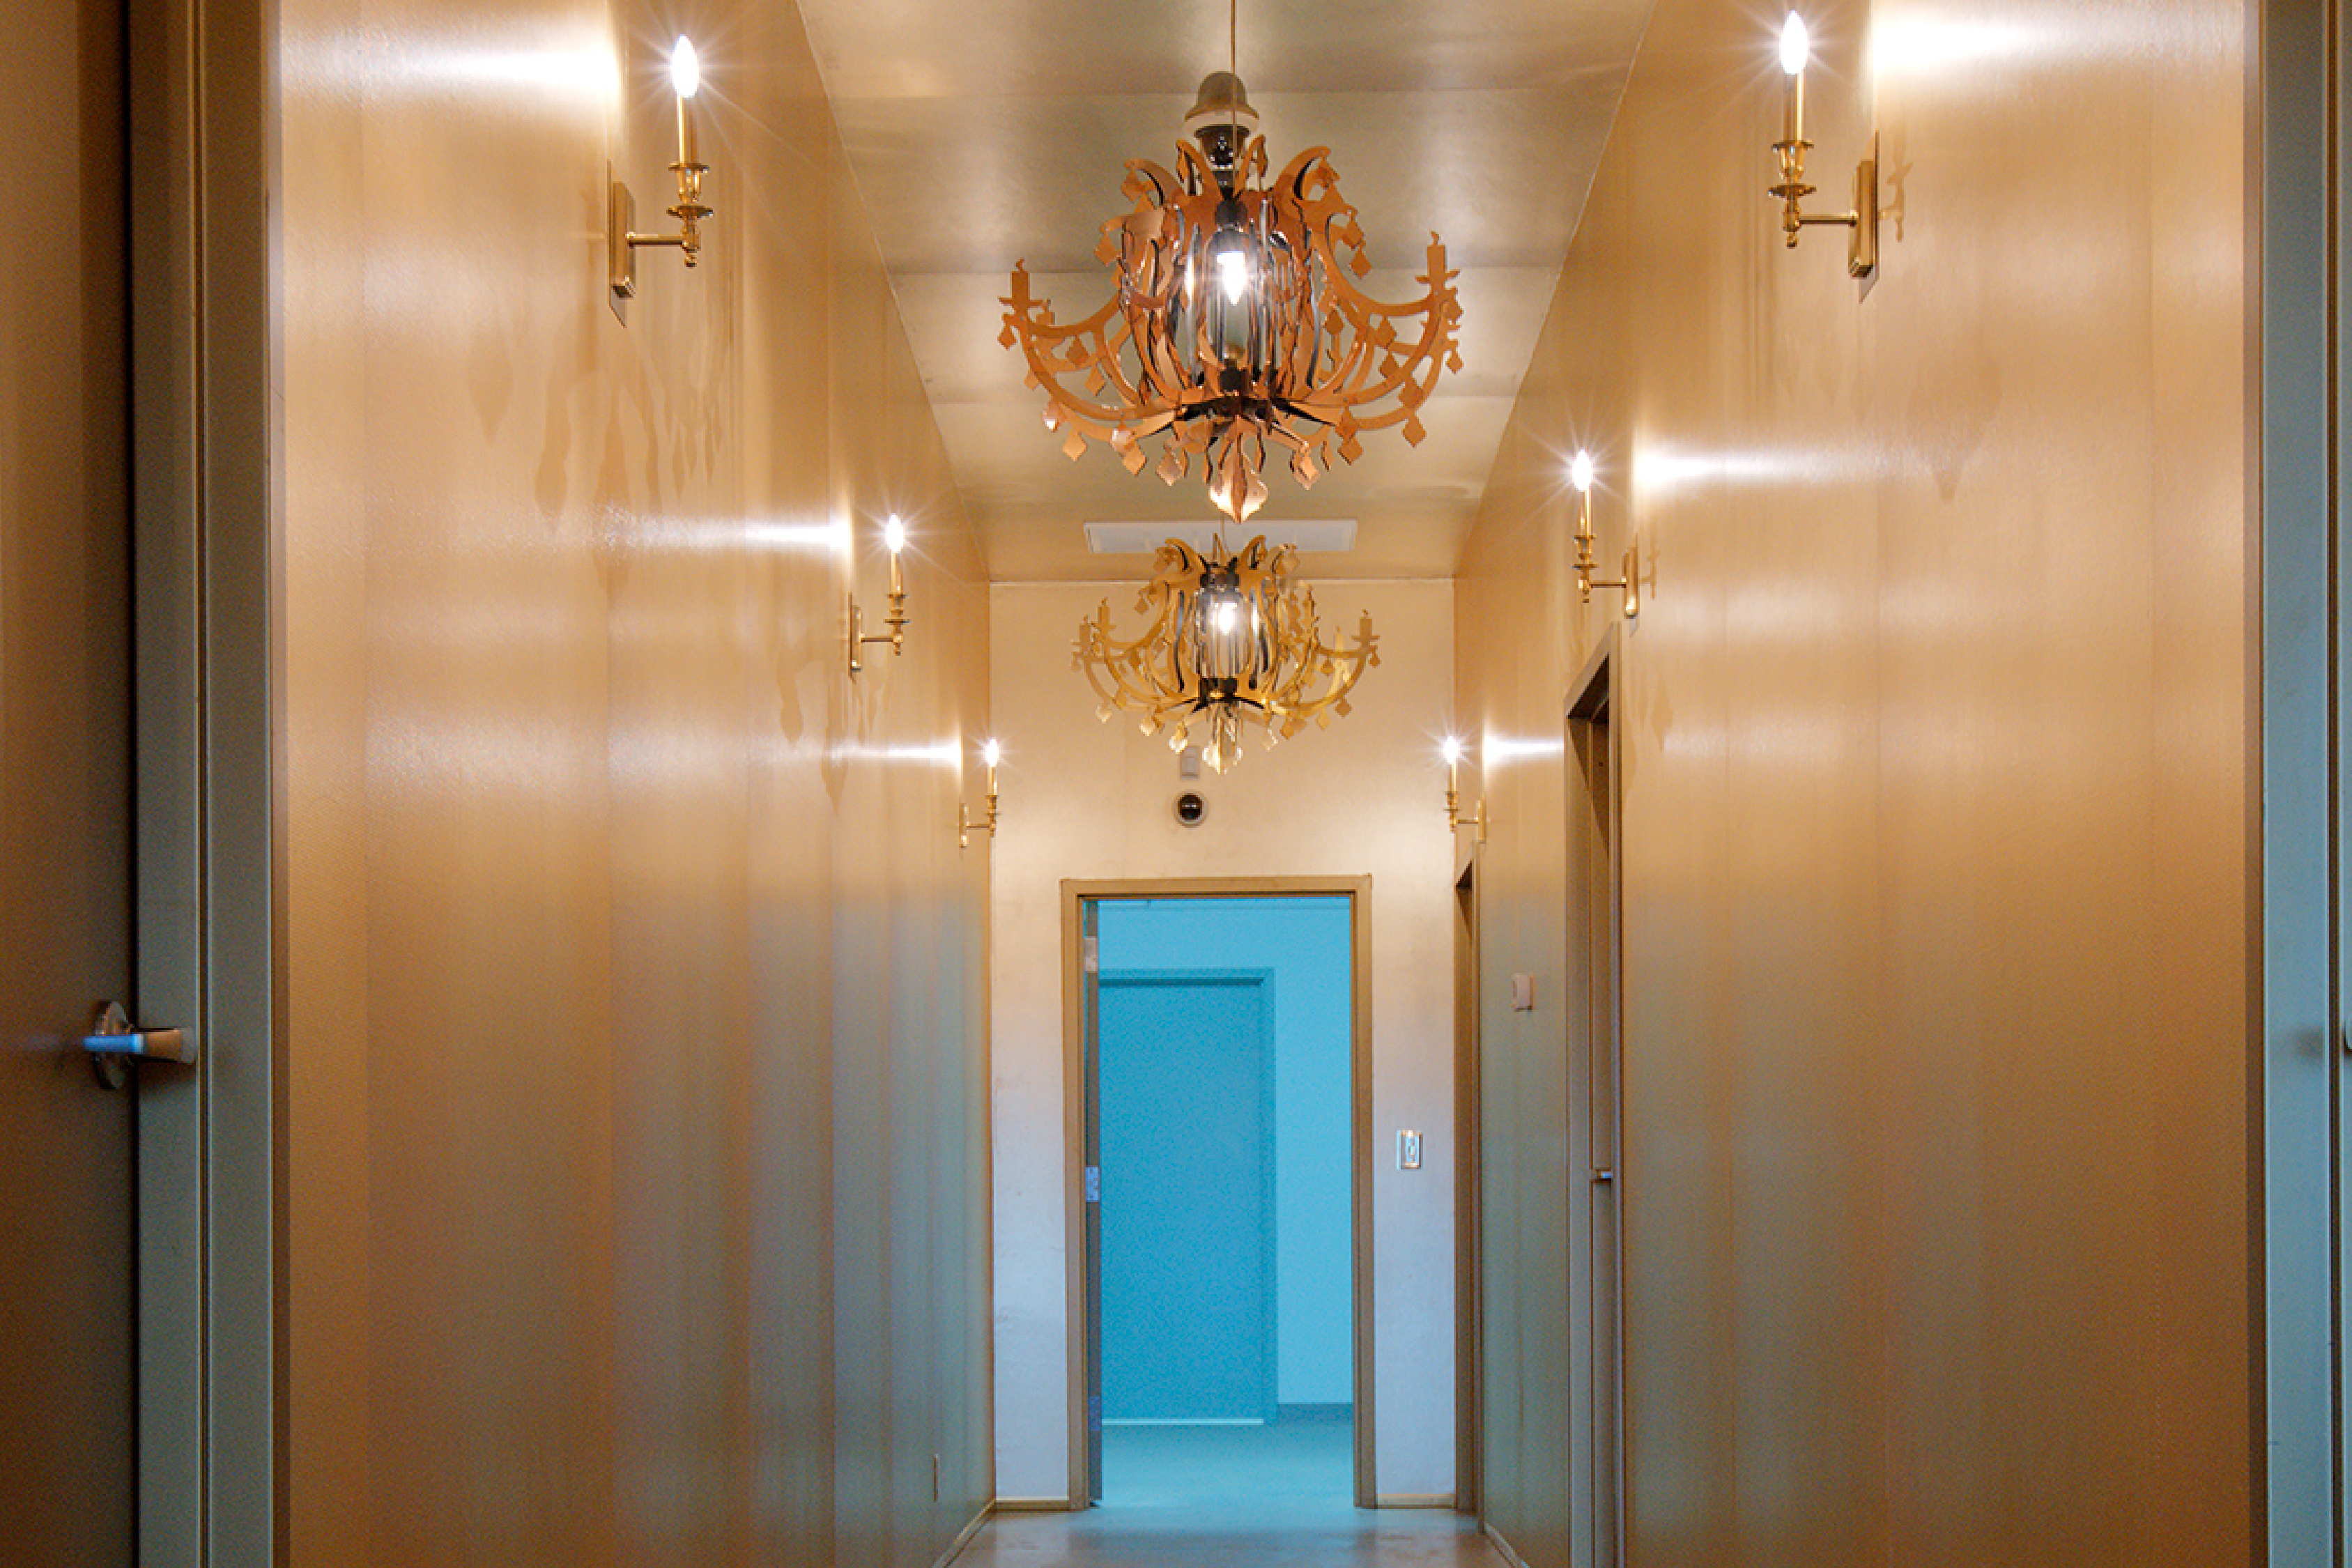 The metallic gold hallway in the Society Awards Production Facility